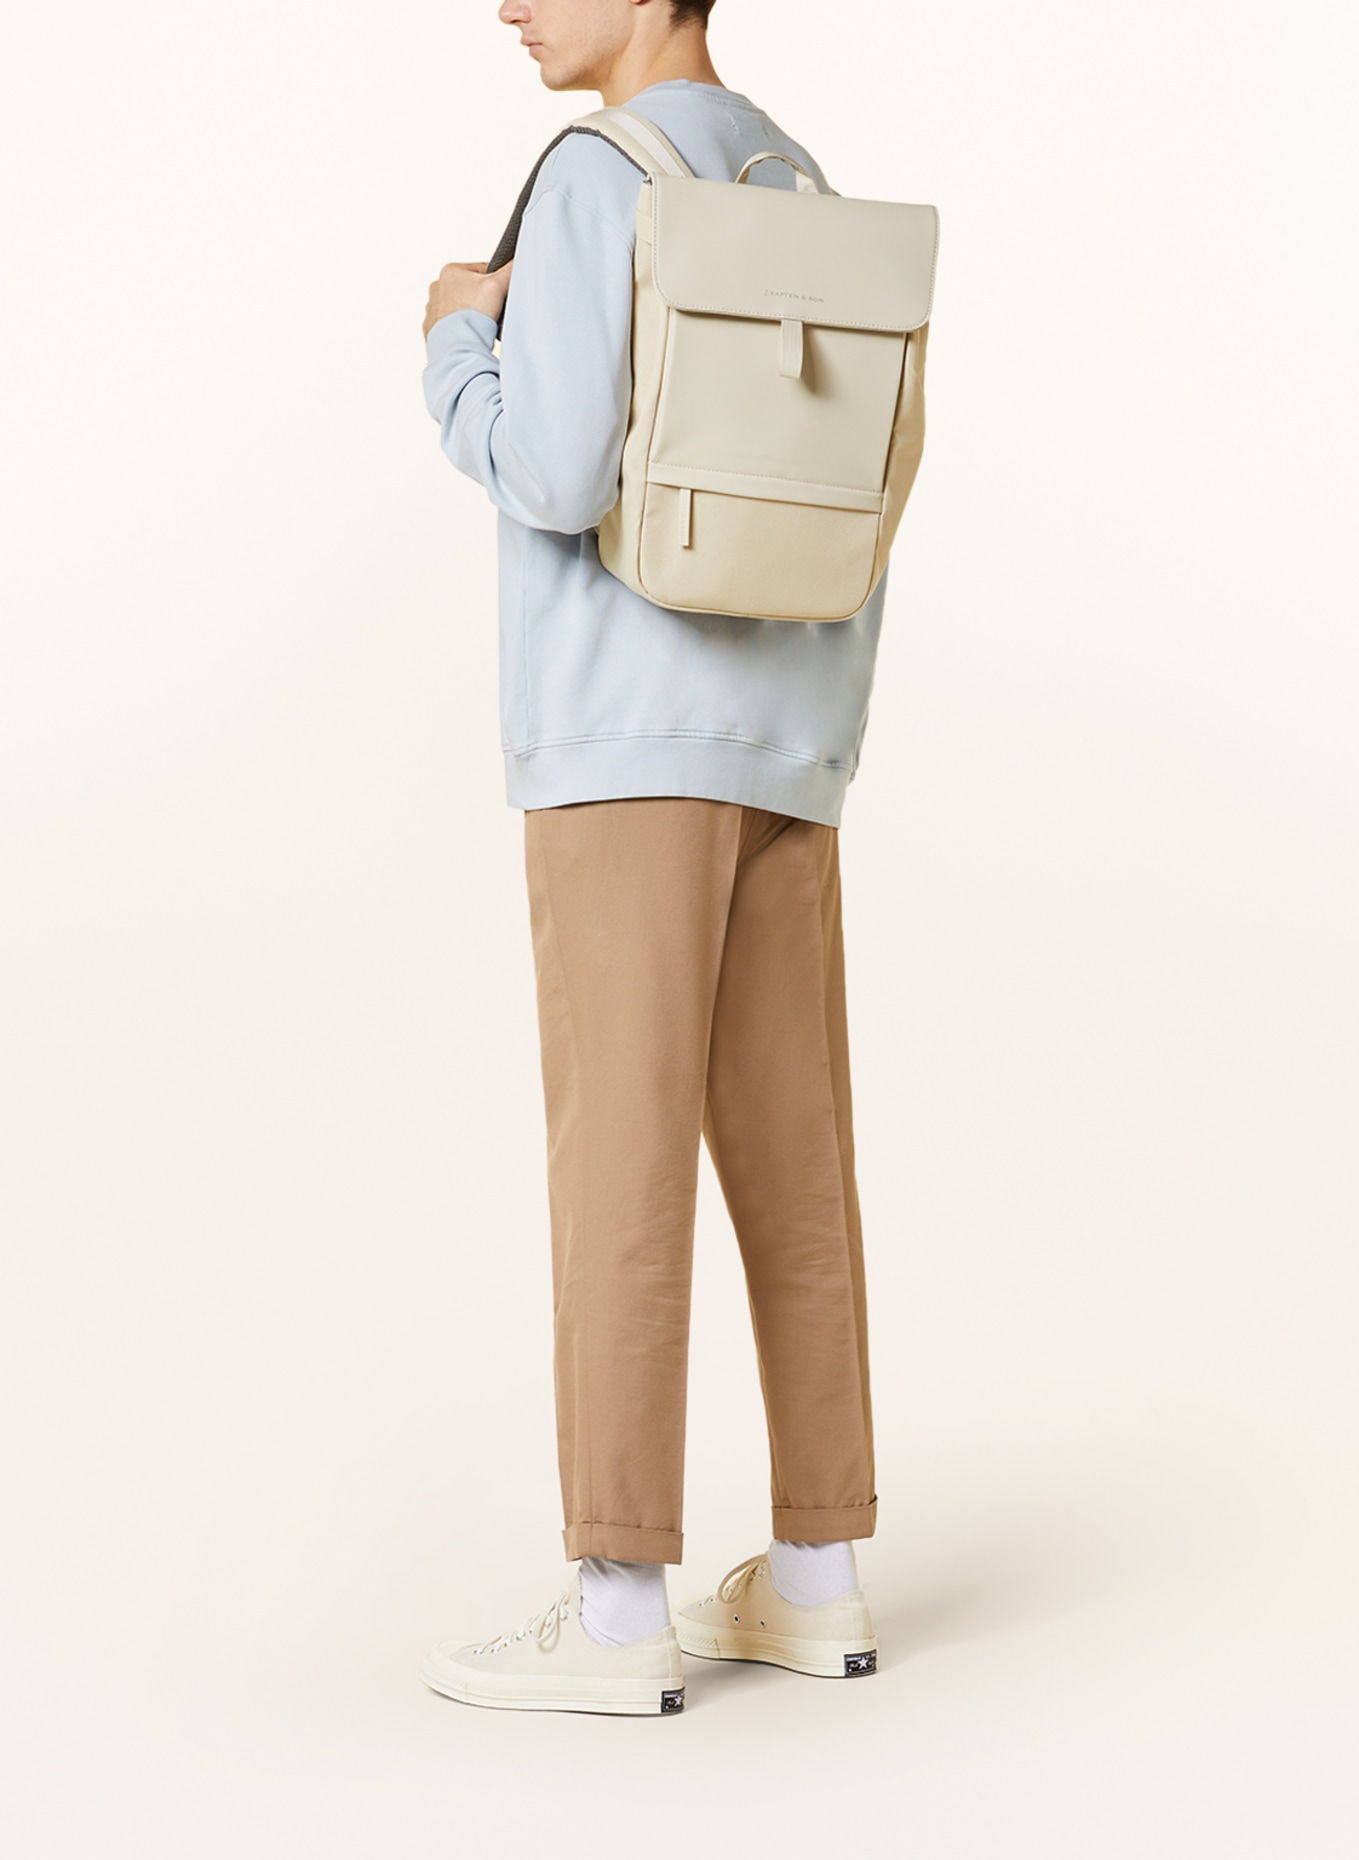 KAPTEN & SON Backpack FYN 14 l with laptop compartment, Color: CREAM (Image 4)